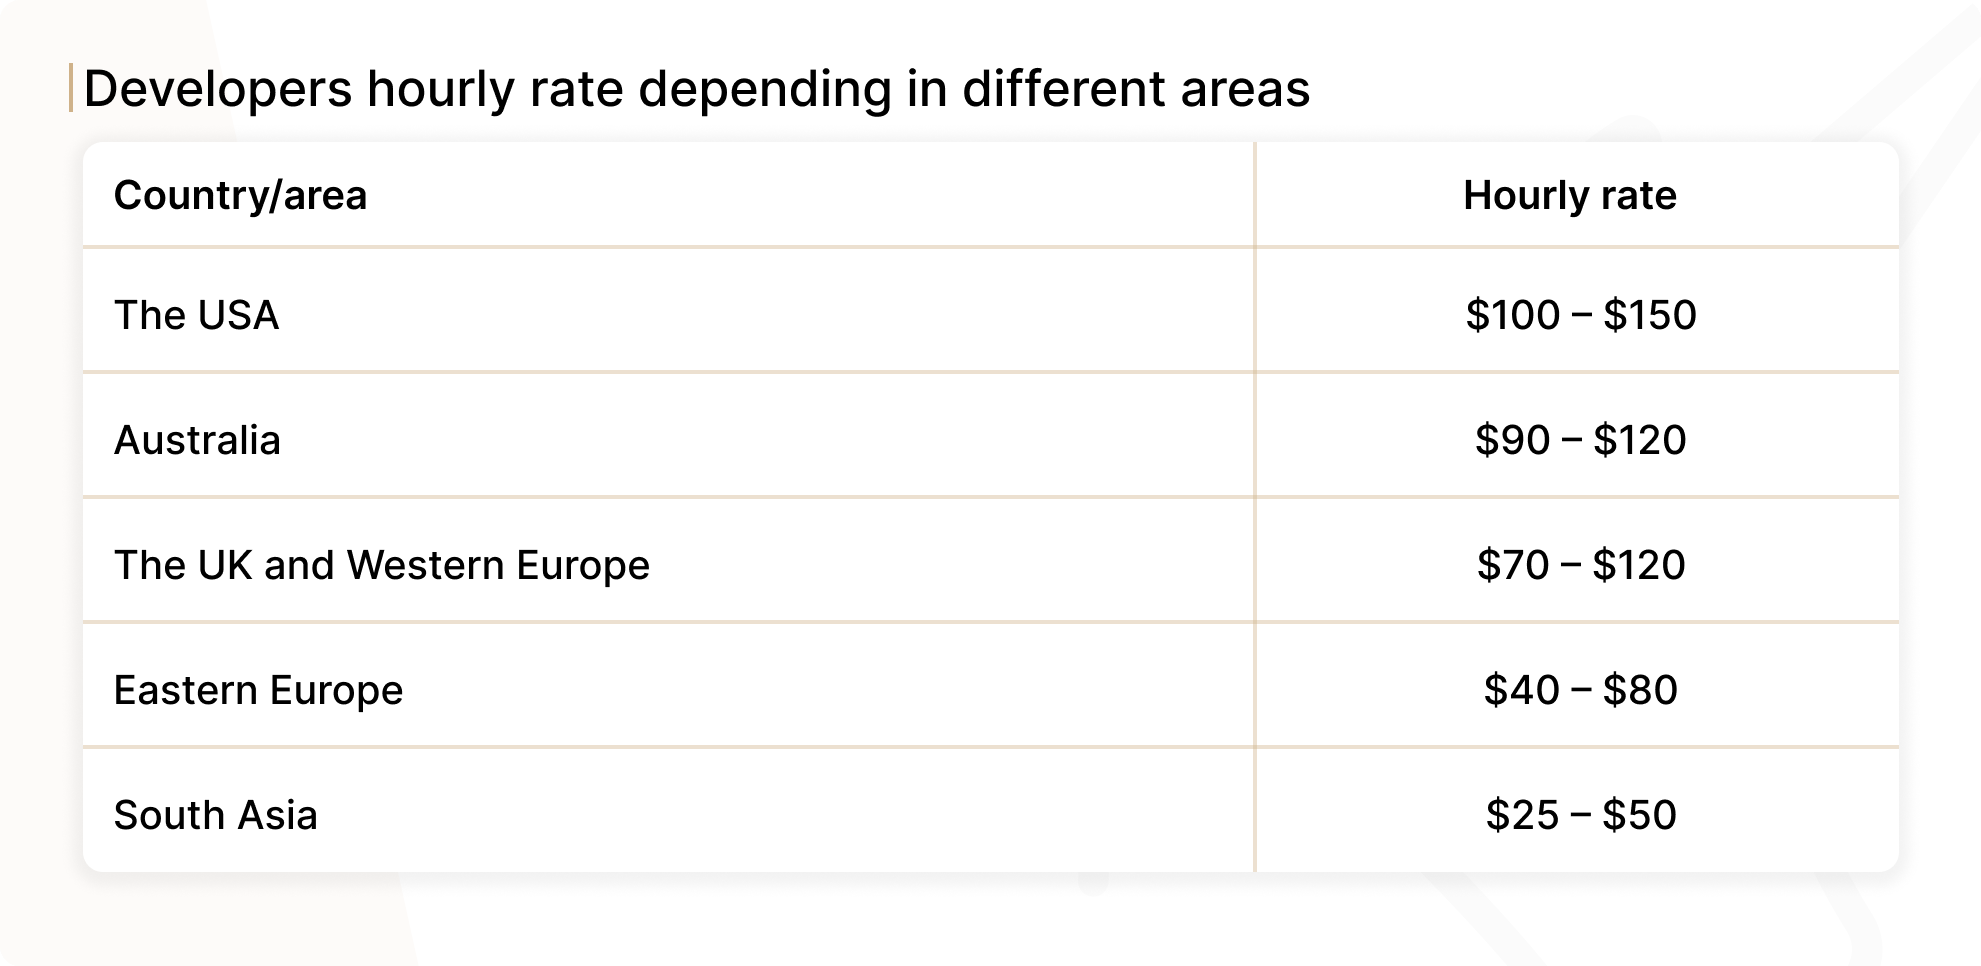 Developers hourly rate depending in different areas